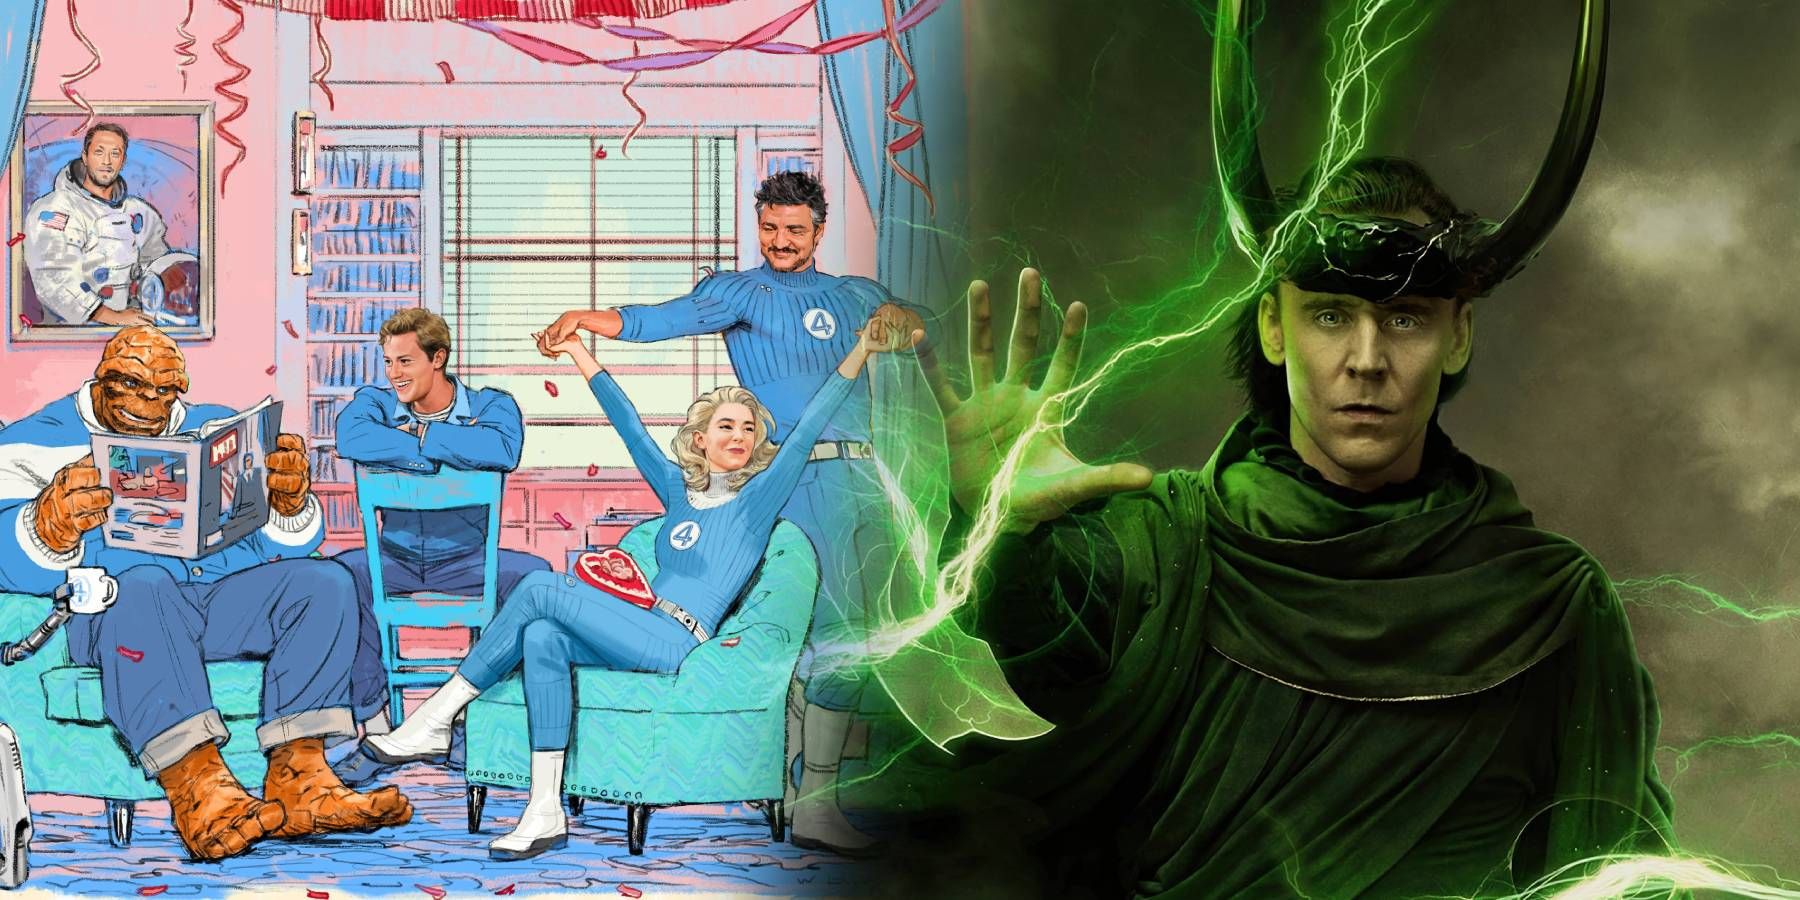 Artwork for 2025's Fantastic Four and a promo image from season 2 of Loki